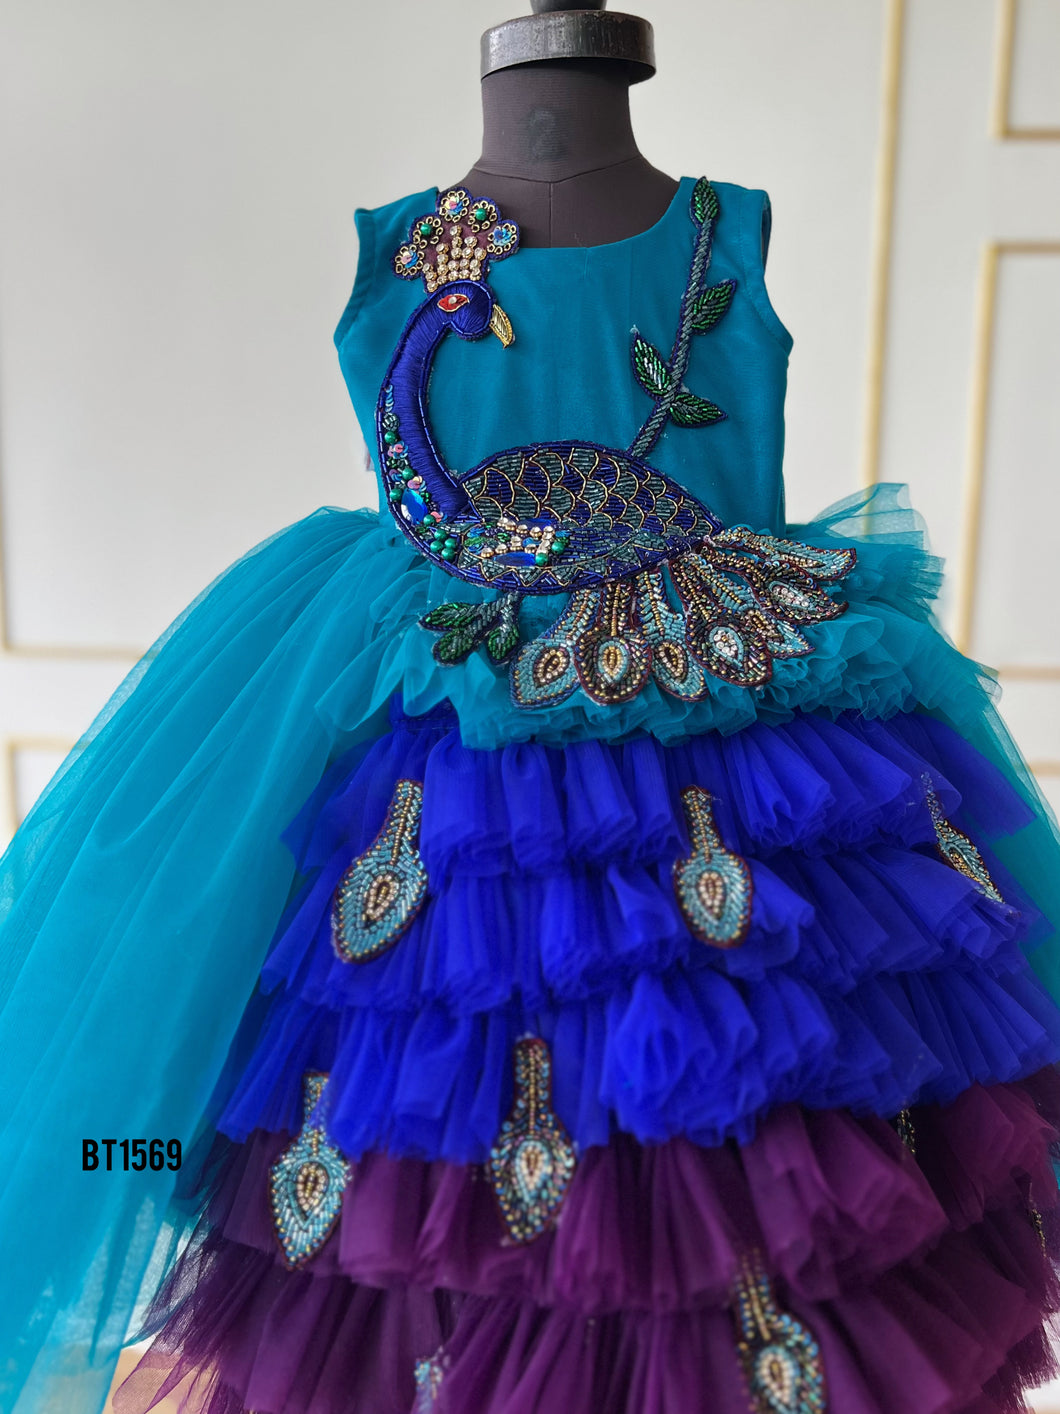 BT1569 Peacock Theme Heavy Embriodery Birthday Frock